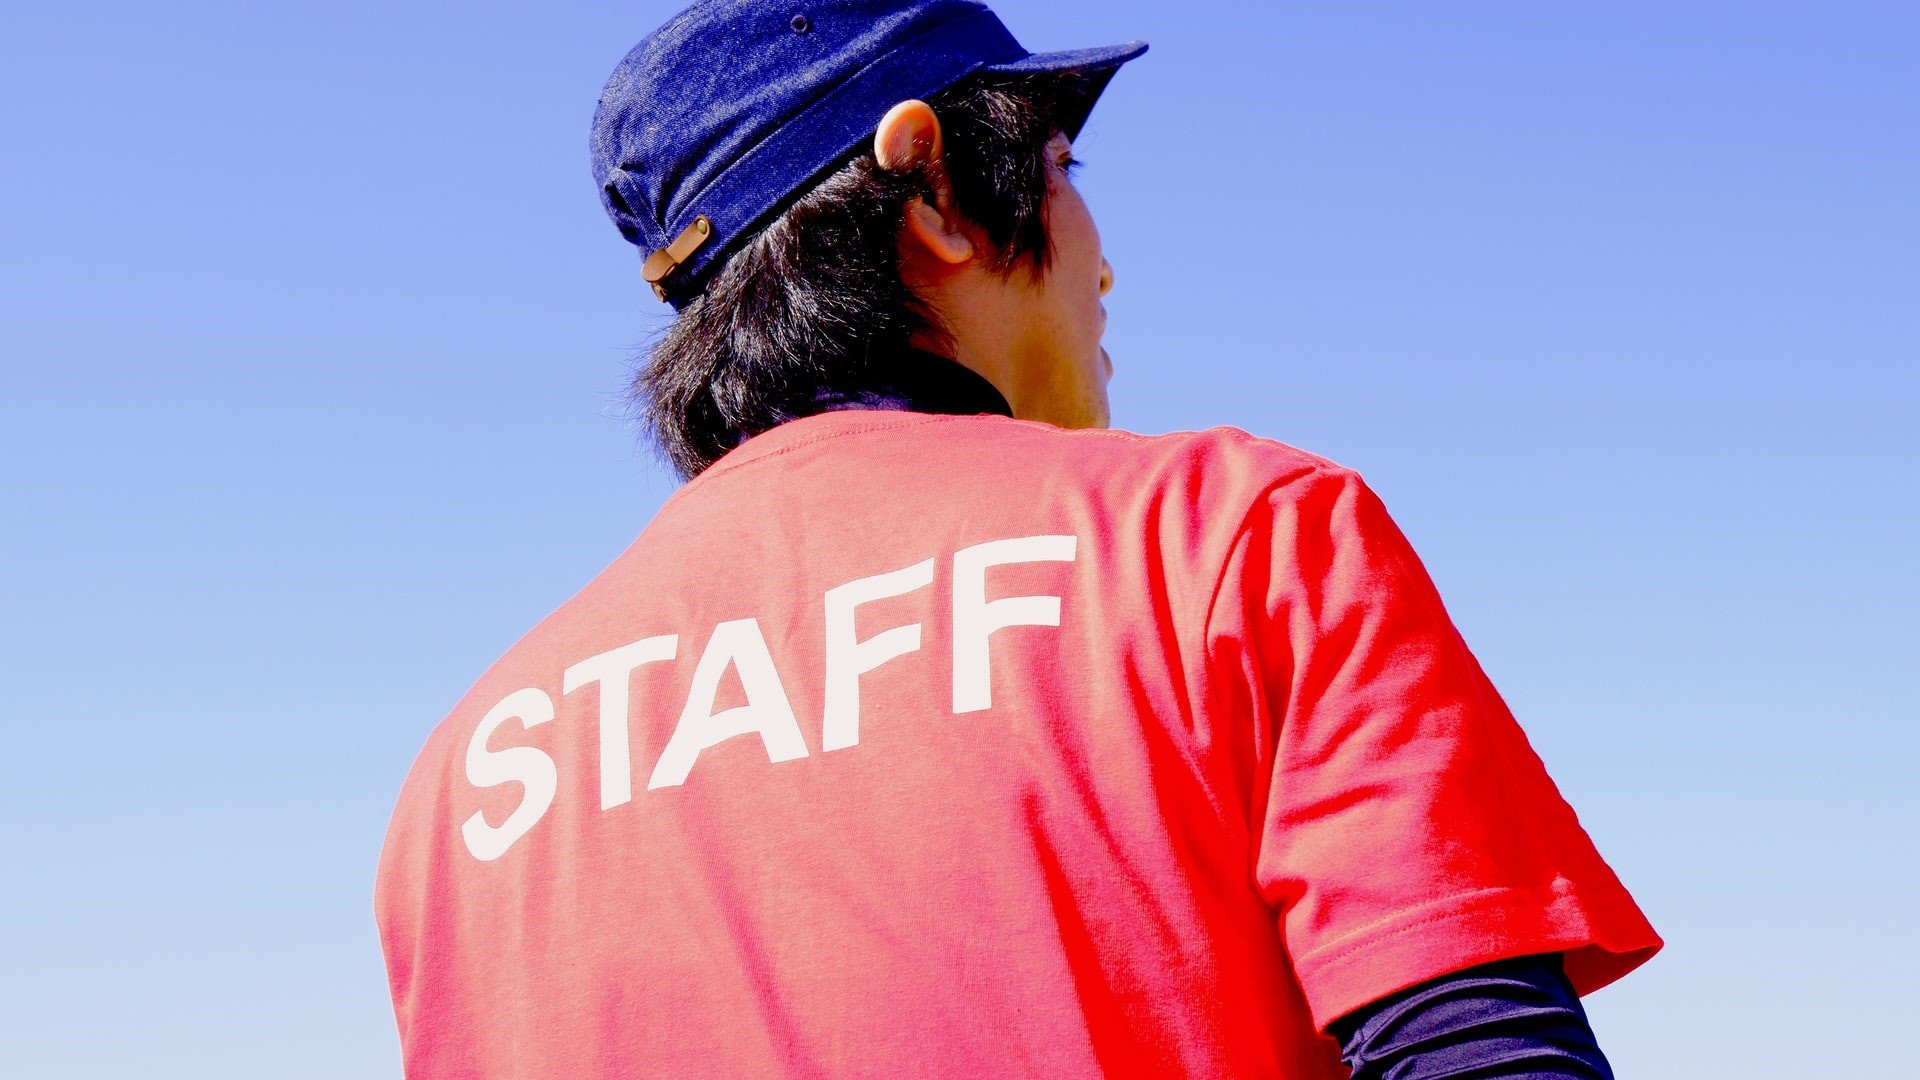 Can't Find Event Staff on Demand? Here's a Surprising Tech Solution